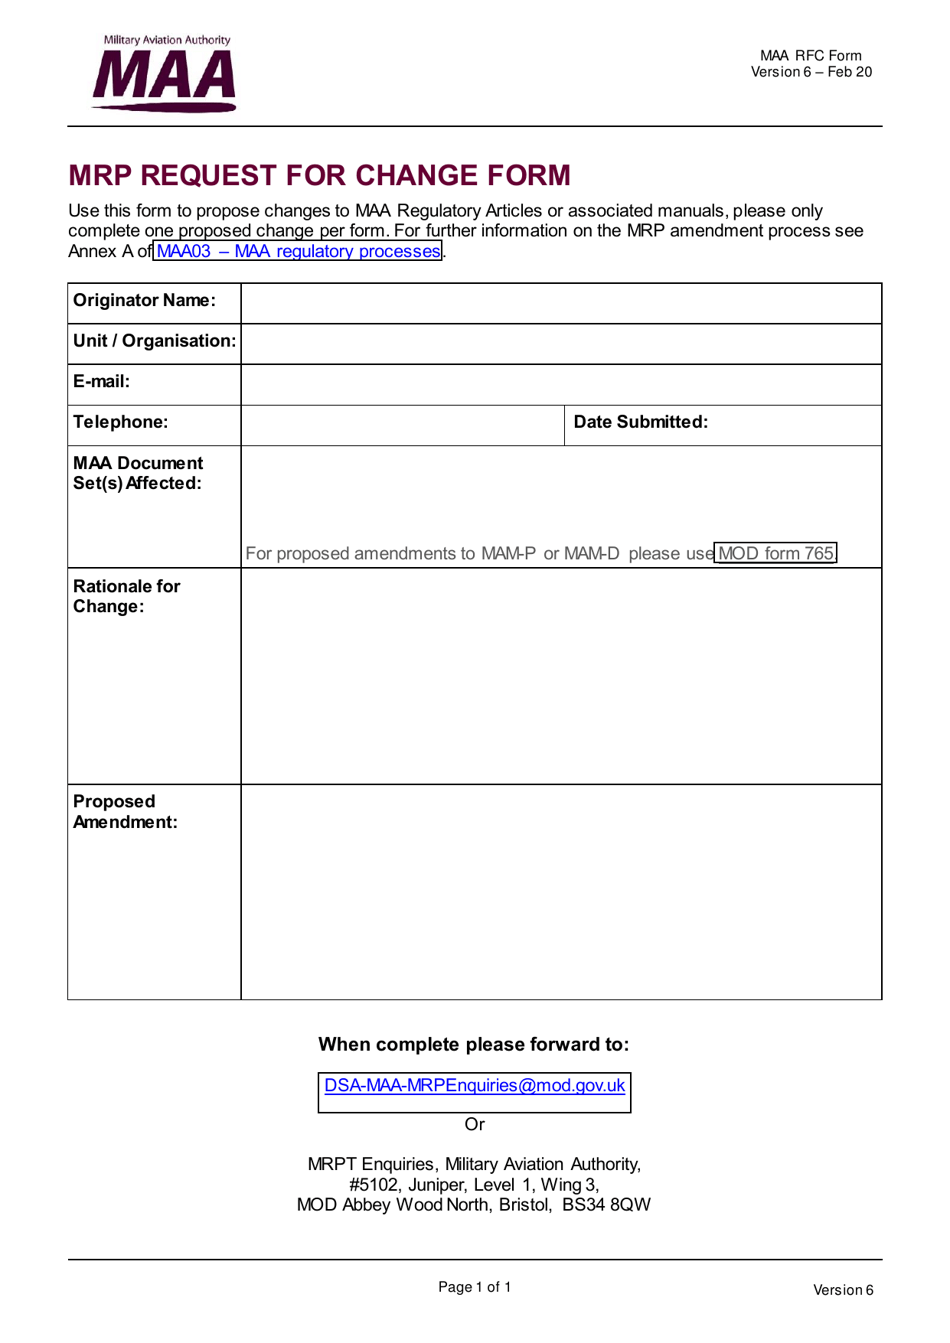 Mrp Request for Change Form - United Kingdom, Page 1